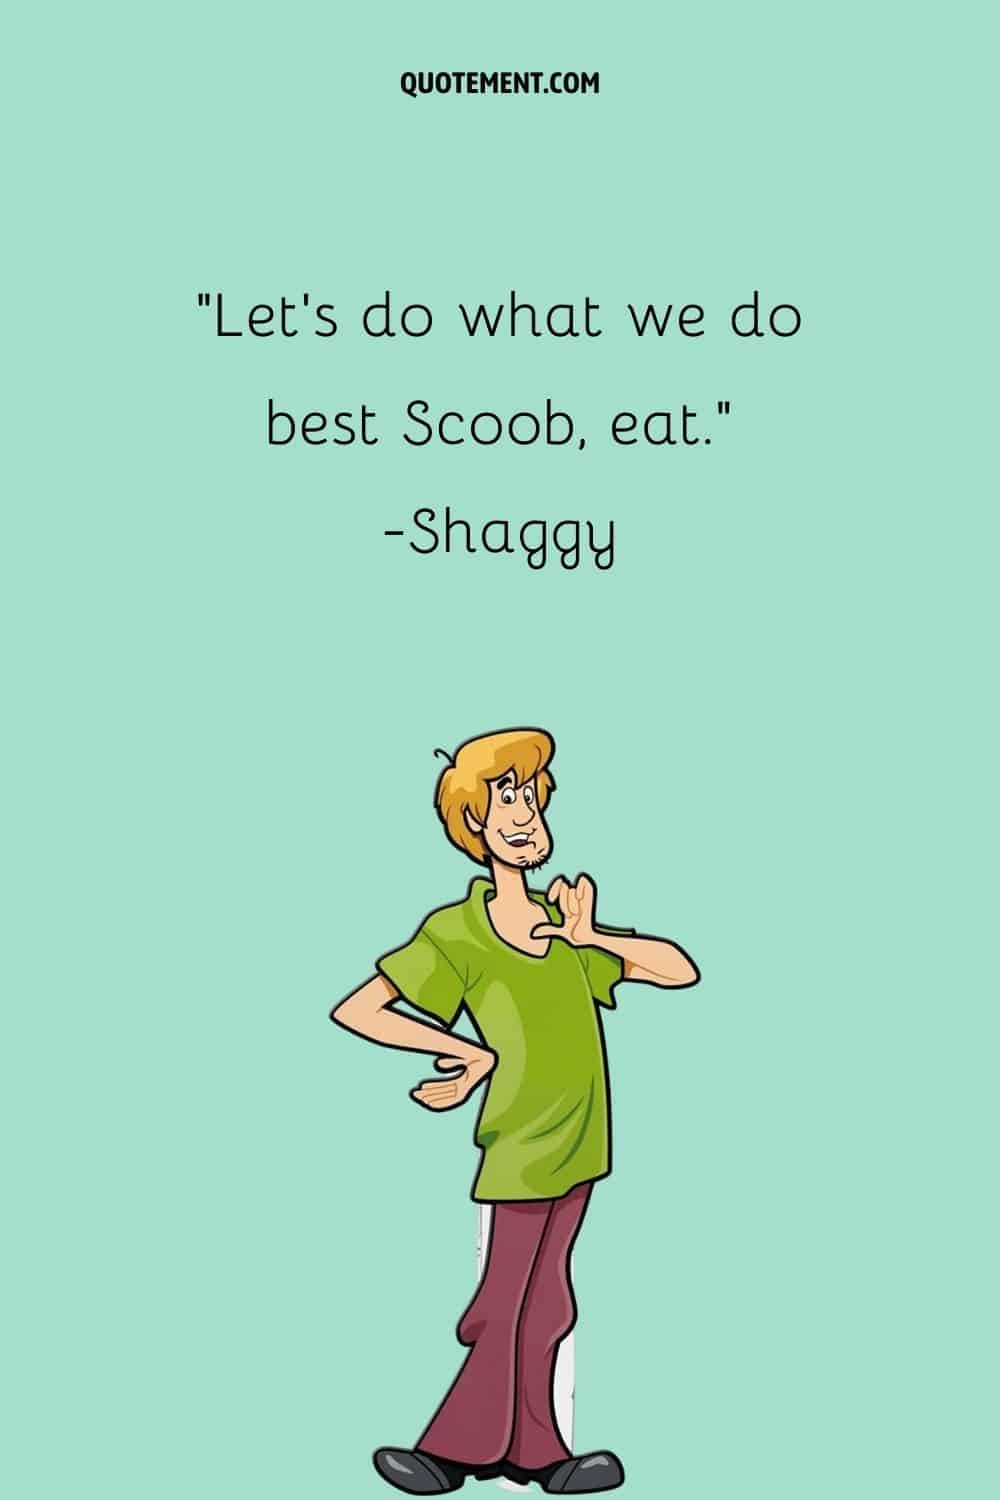 image of Shaggy representing famous Shaggy Quote
